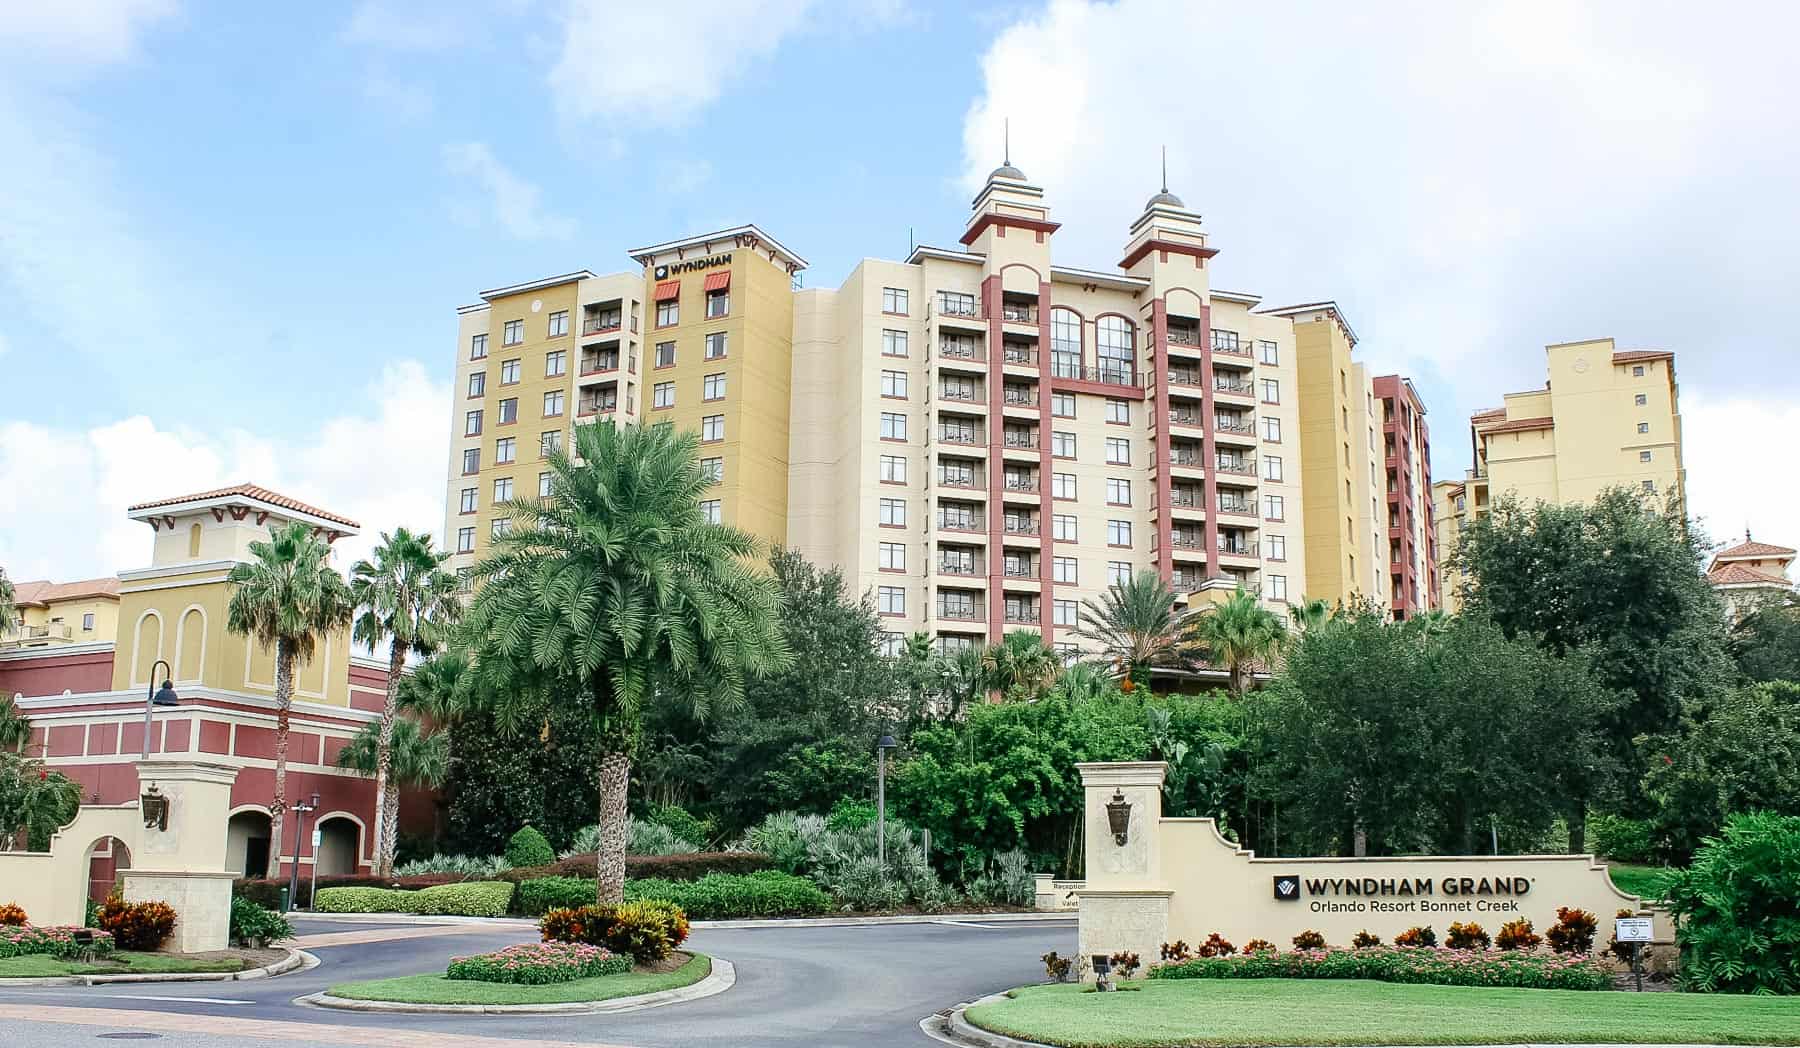 The Wyndham Grand Orlando is one of our top choices for off site hotels near Disney World. 